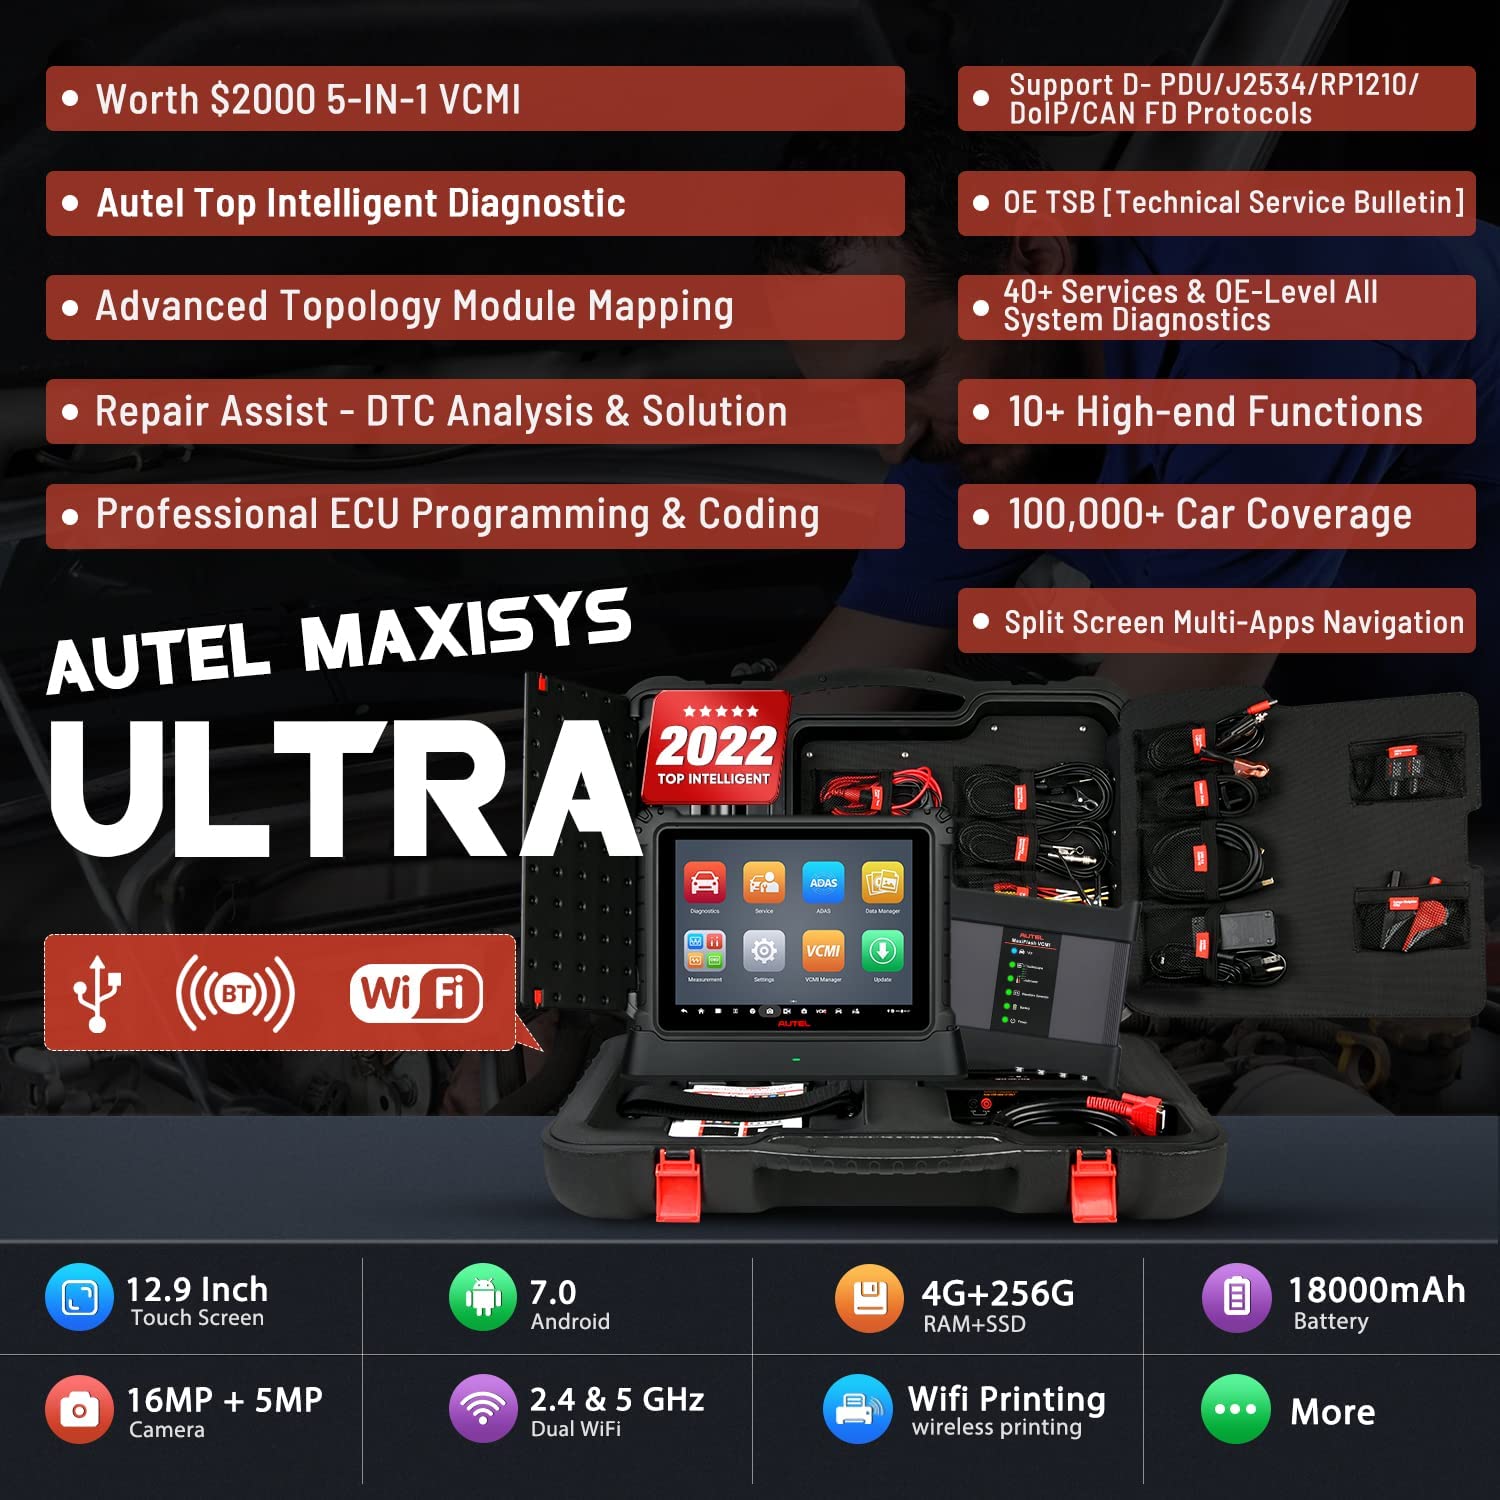 Autel Scanner MaxiSys Ultra Dignostic Tools, J-2534 ECU Programming & Coding, Topology Map, Multi-Screen Display, 5-in-1 VCMI, 40+ Services